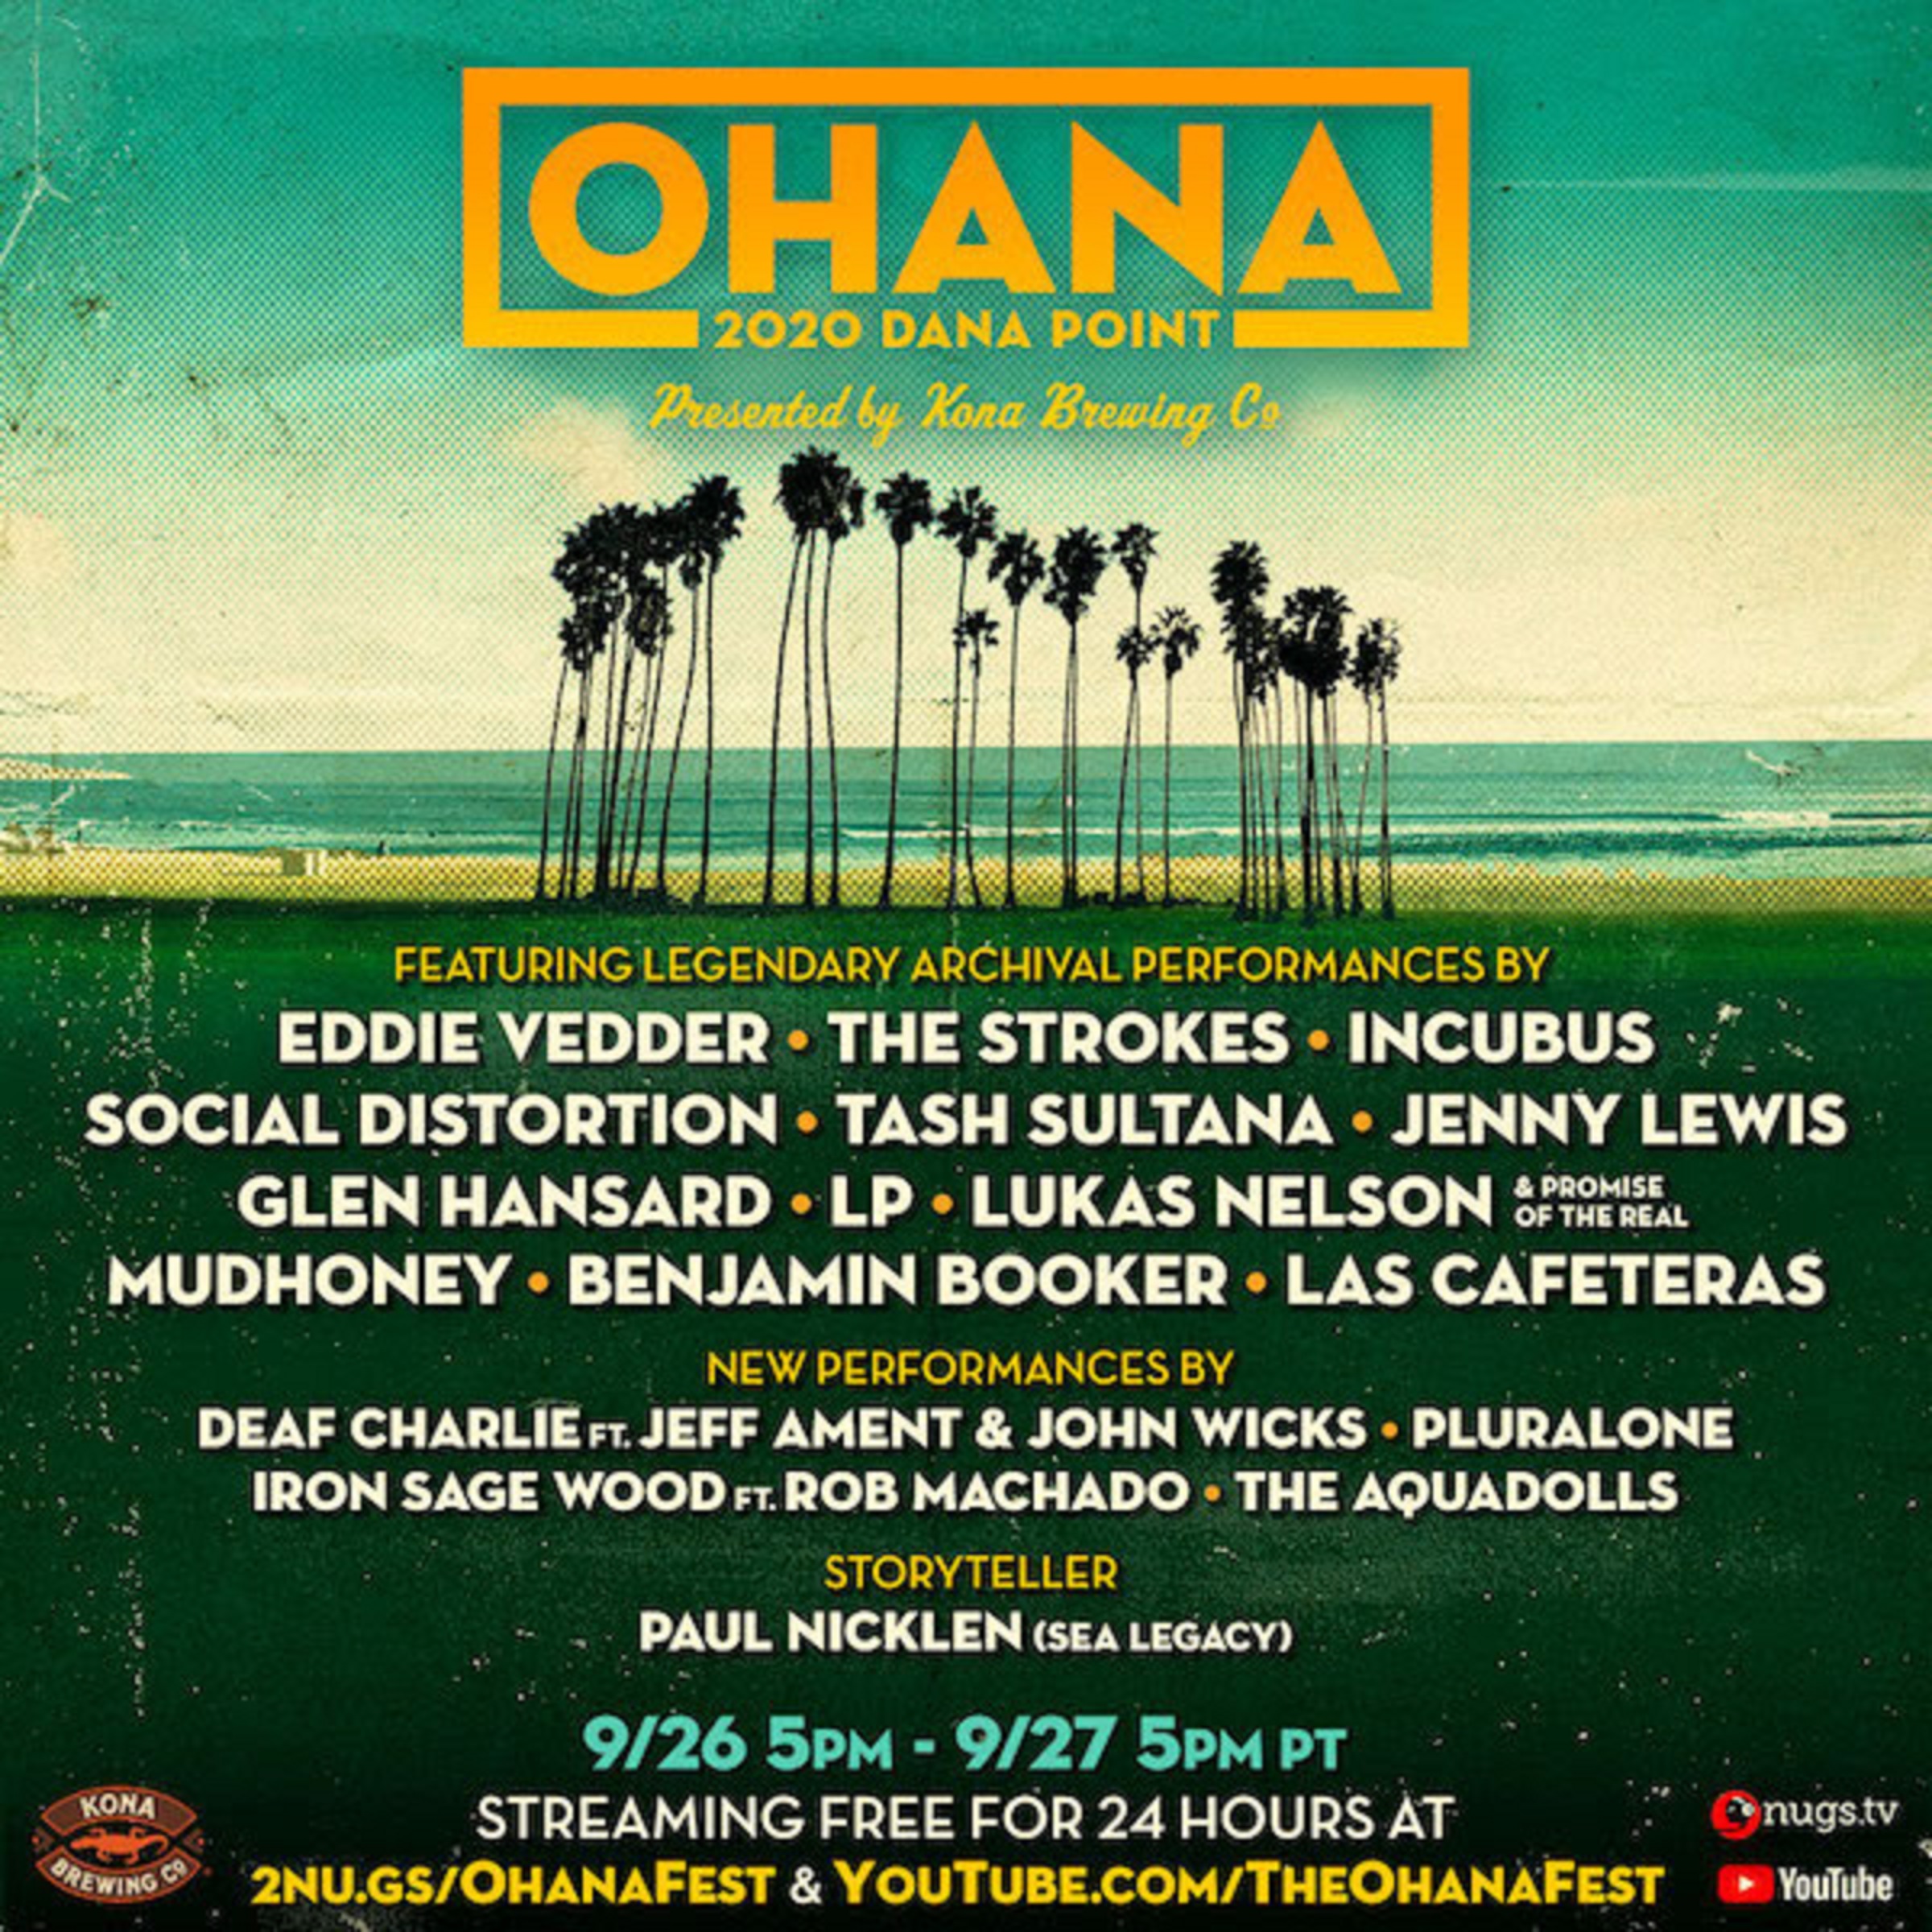 Ohana 2020 - Tune in this weekend!